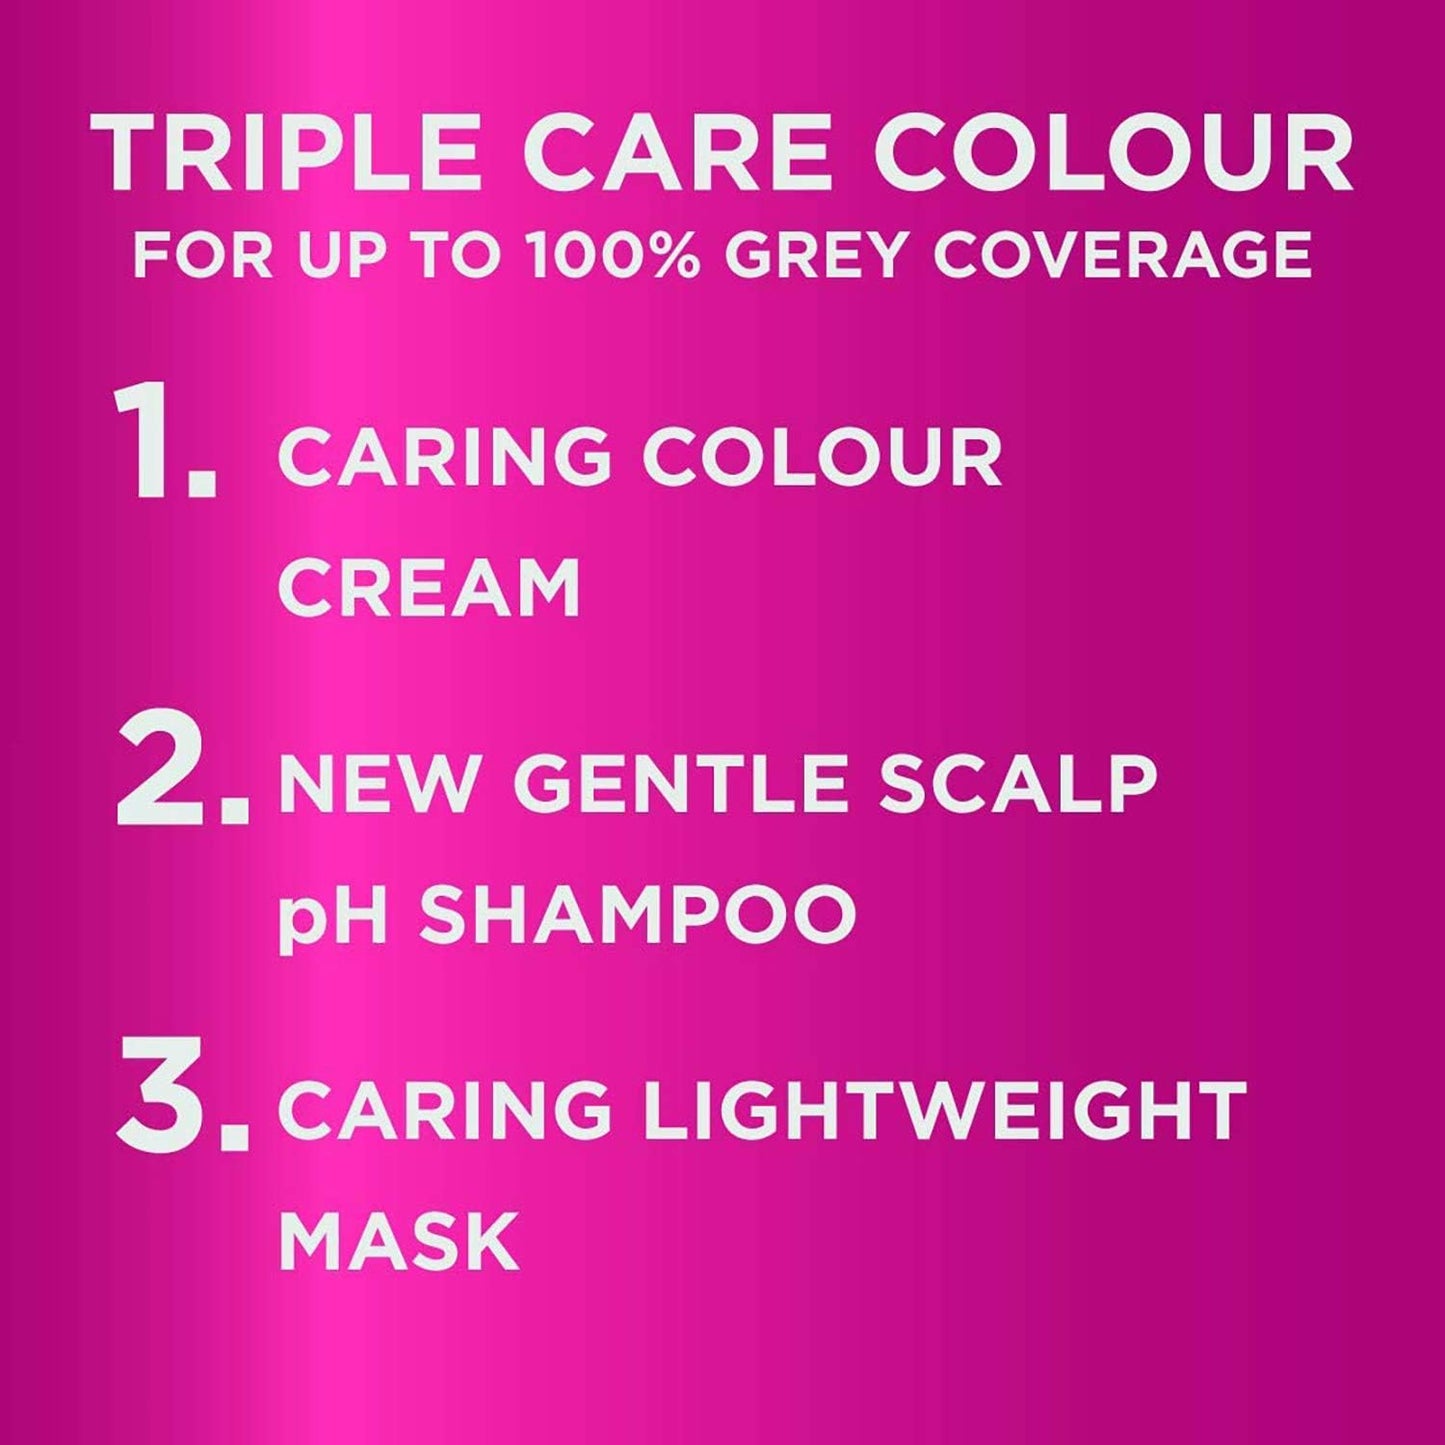 L'Oréal Paris, Permanent Hair Dye, Strengthening & With Up To 100% Grey Coverage, Excellence